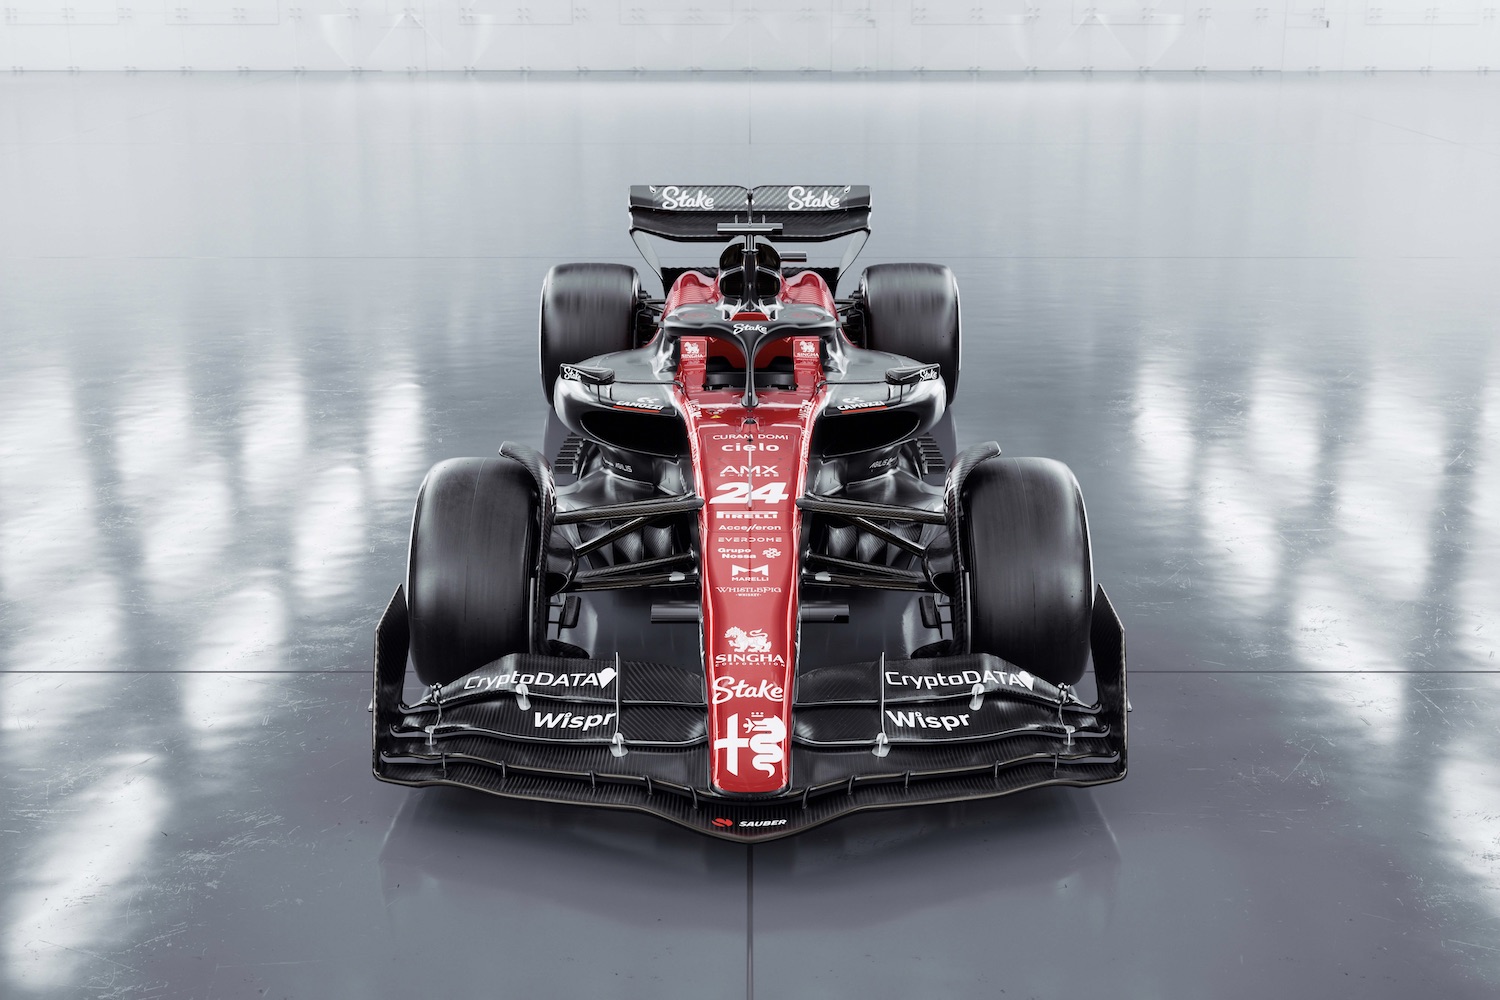 Overhead shot of the front end of the 2023 Alfa Romeo F1 C43 show car parked in a studio with studio lighting.